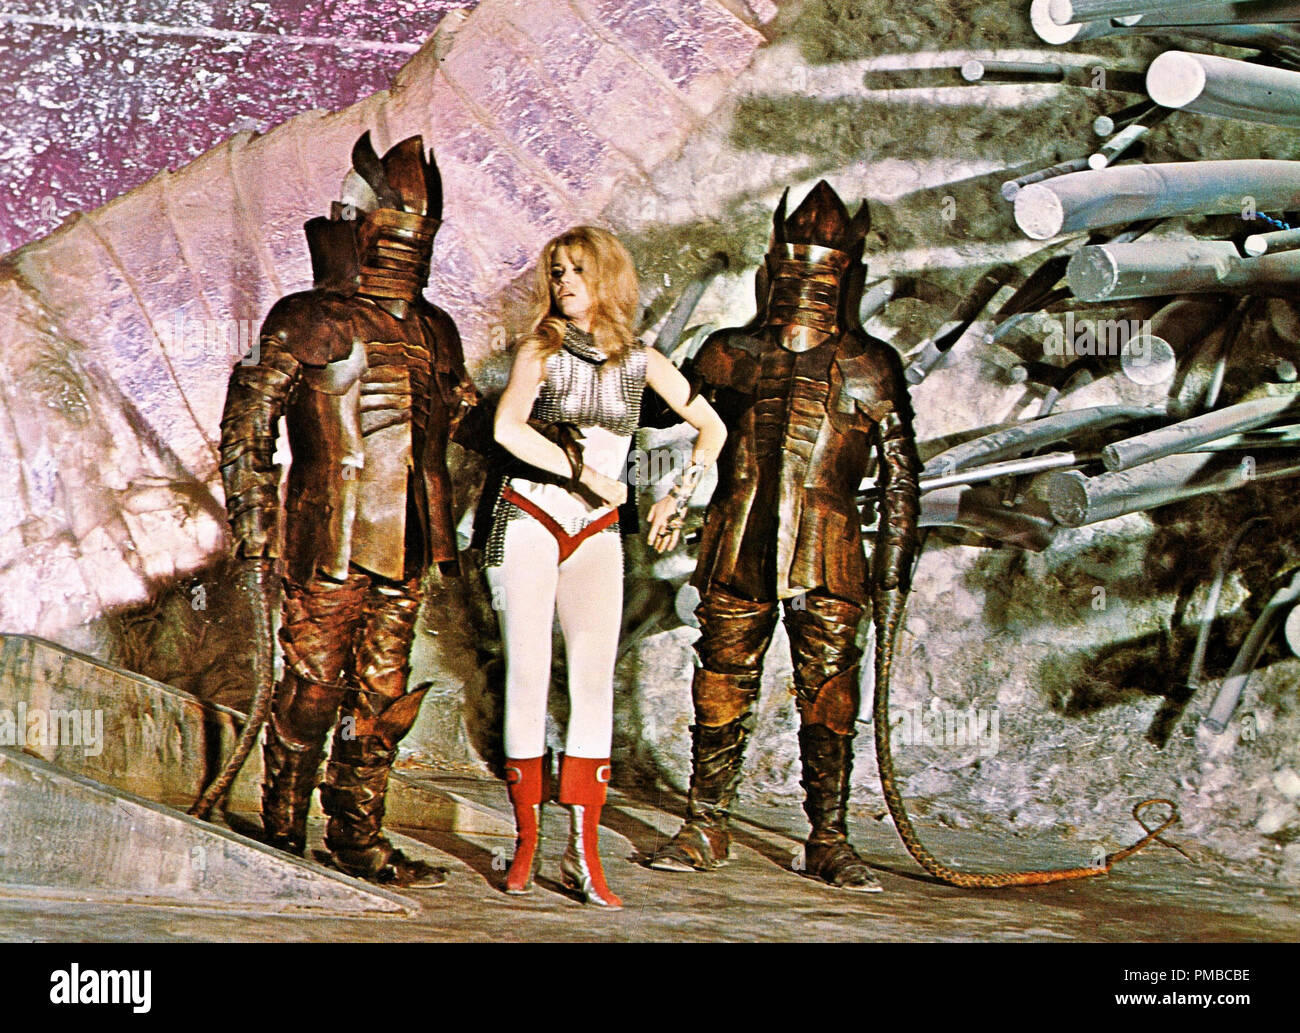 Jane Fonda, 'Barbarella', 1968 Paramount Pictures  Printed Lobby Cards / Graphics File Reference # 32914 604THA Stock Photo